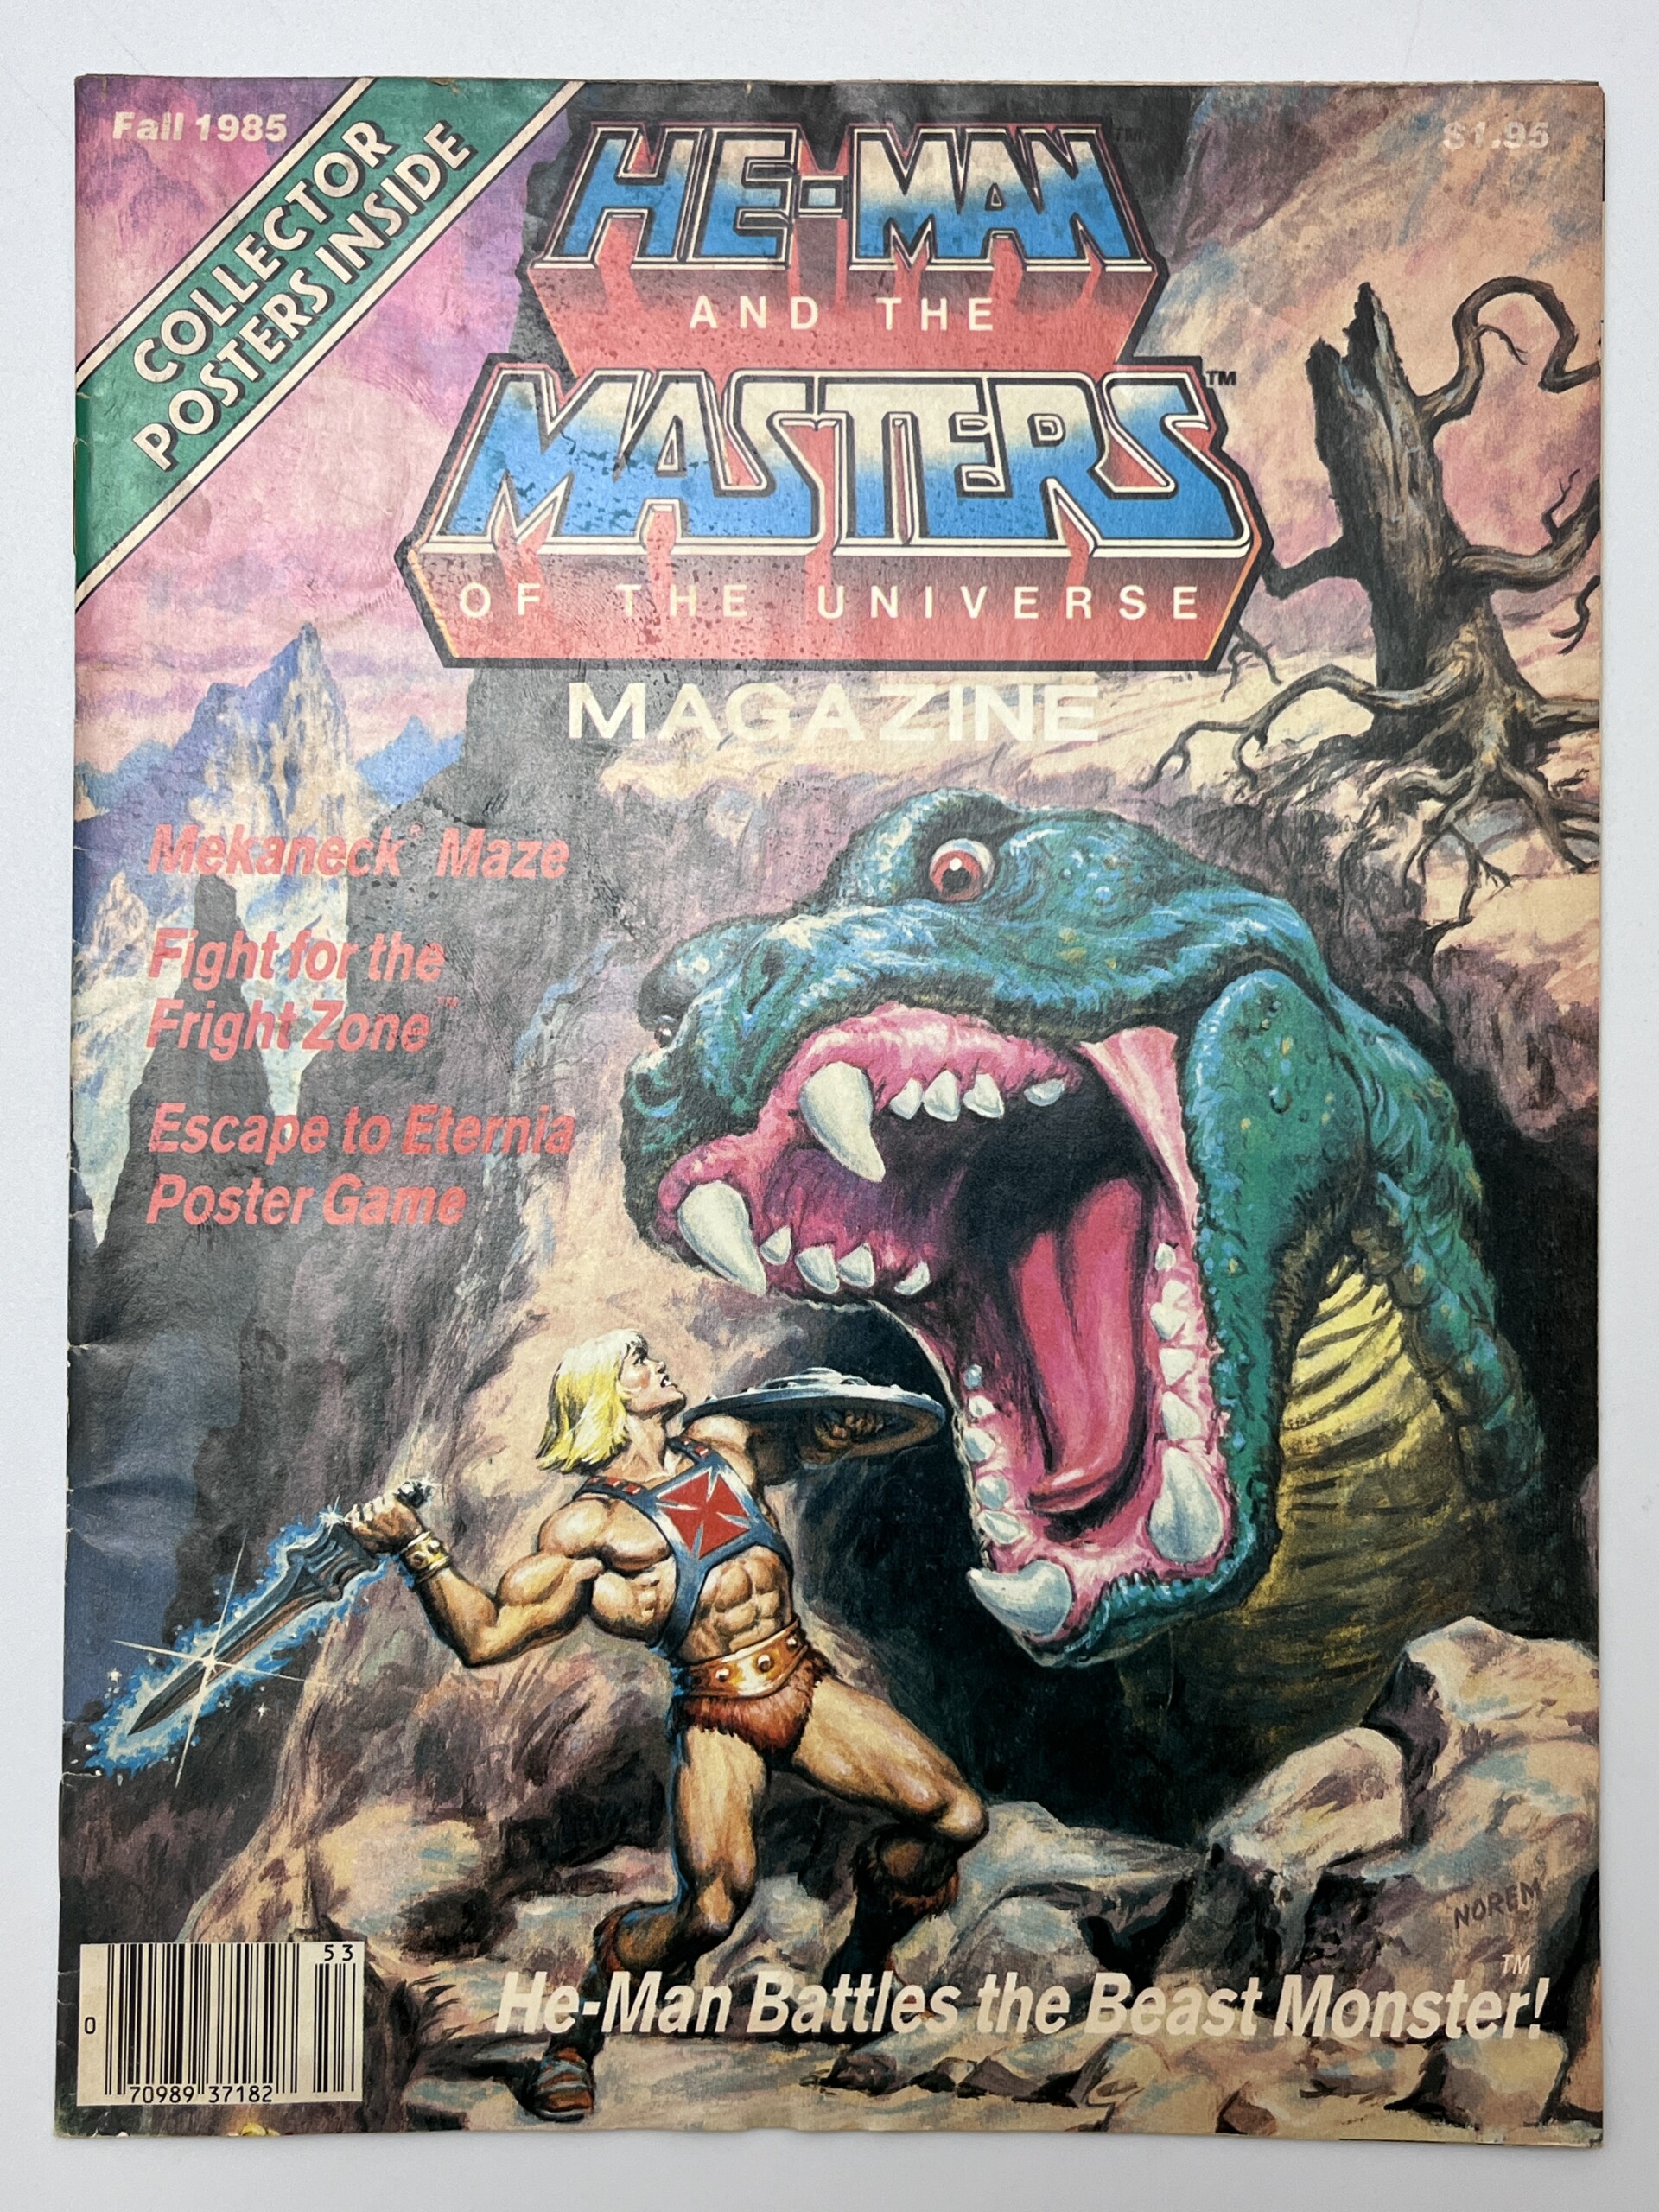 He-Man and the Masters of the Universe Magazine (Fall 1985) w/poster